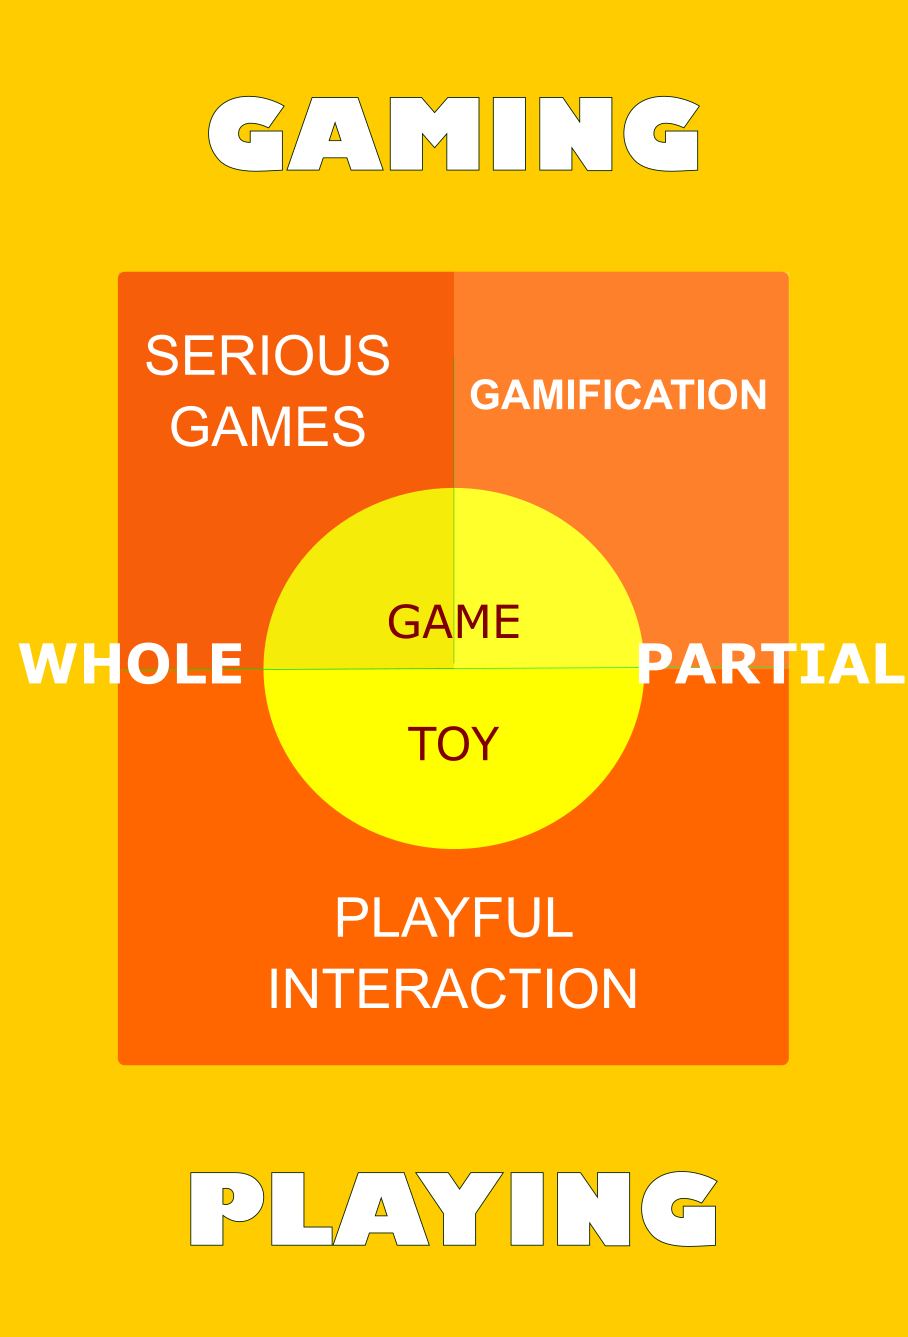 gamification in gamesworld